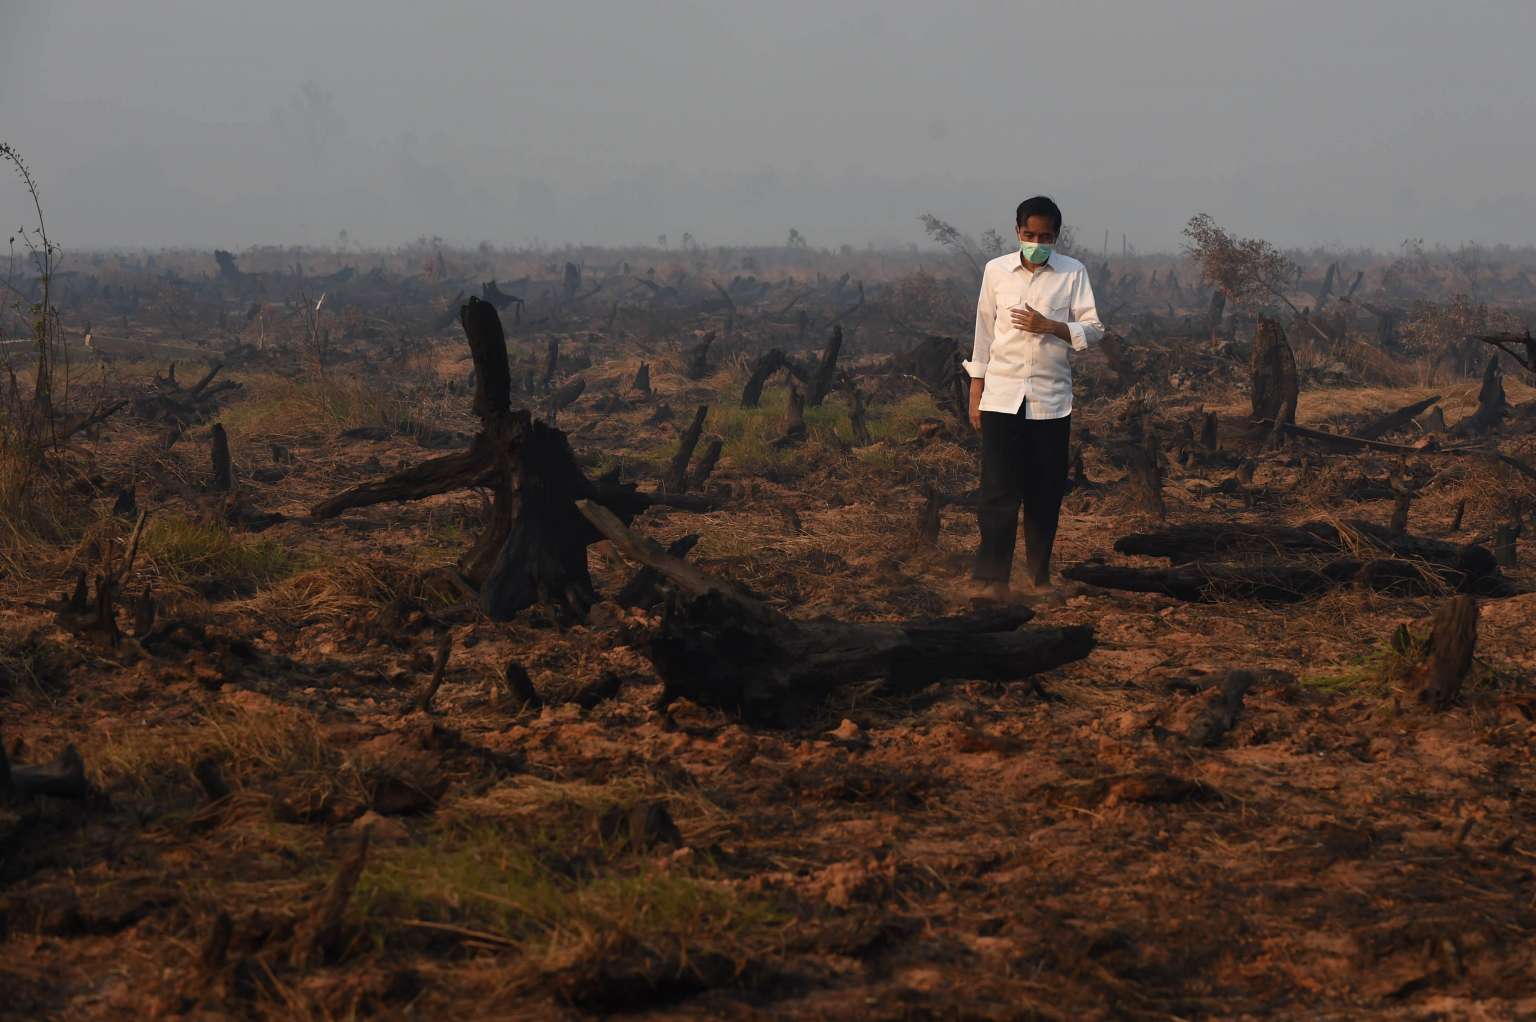 Indonesia's President Joko Widodo inspects a peatland clearing that was engulfed by fire in 2015. (Photo: AFP/Romeo Gacad) 